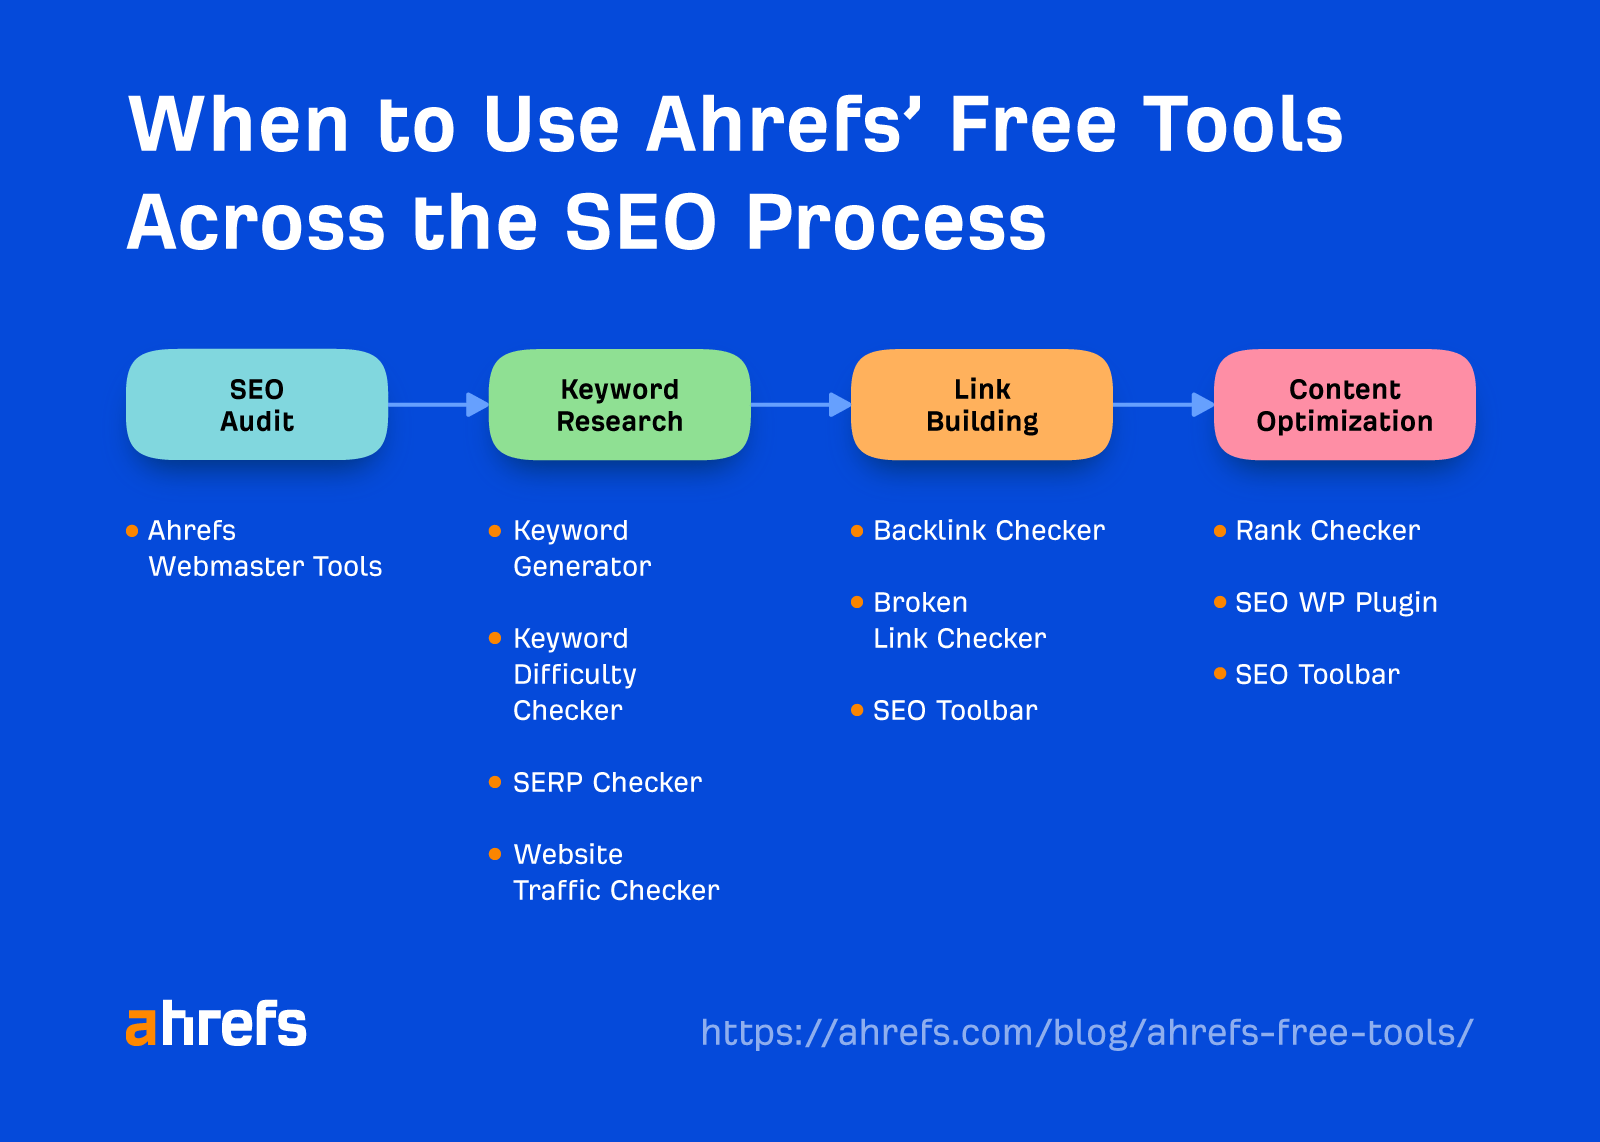 When to use Ahrefs' free tools across the SEO process